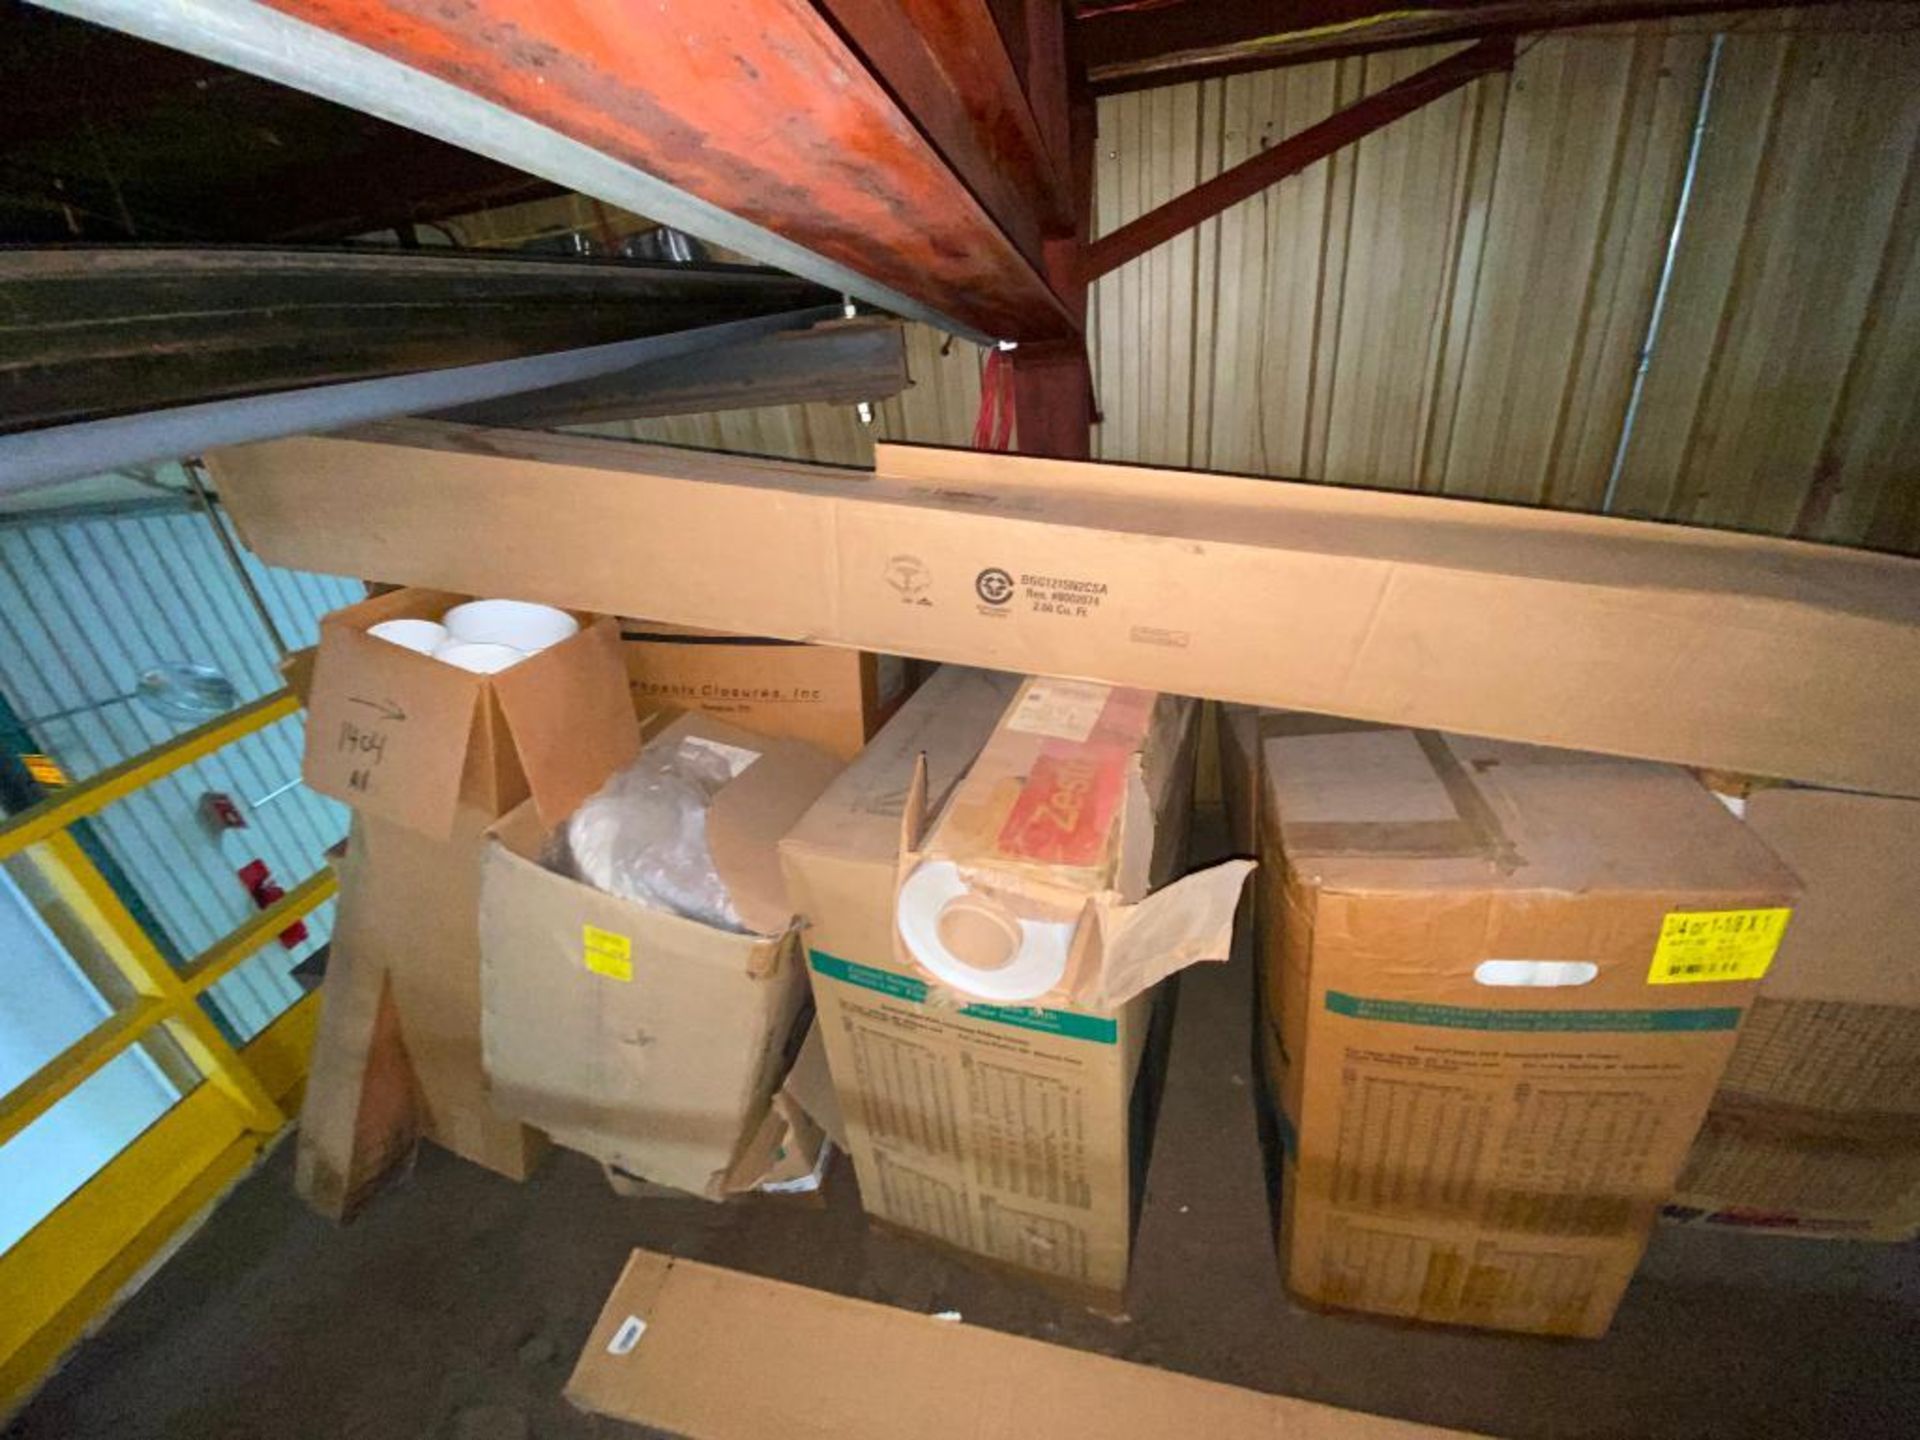 contents of wood deck, pipe insulation, replacement lighting and bulbs - Image 8 of 11